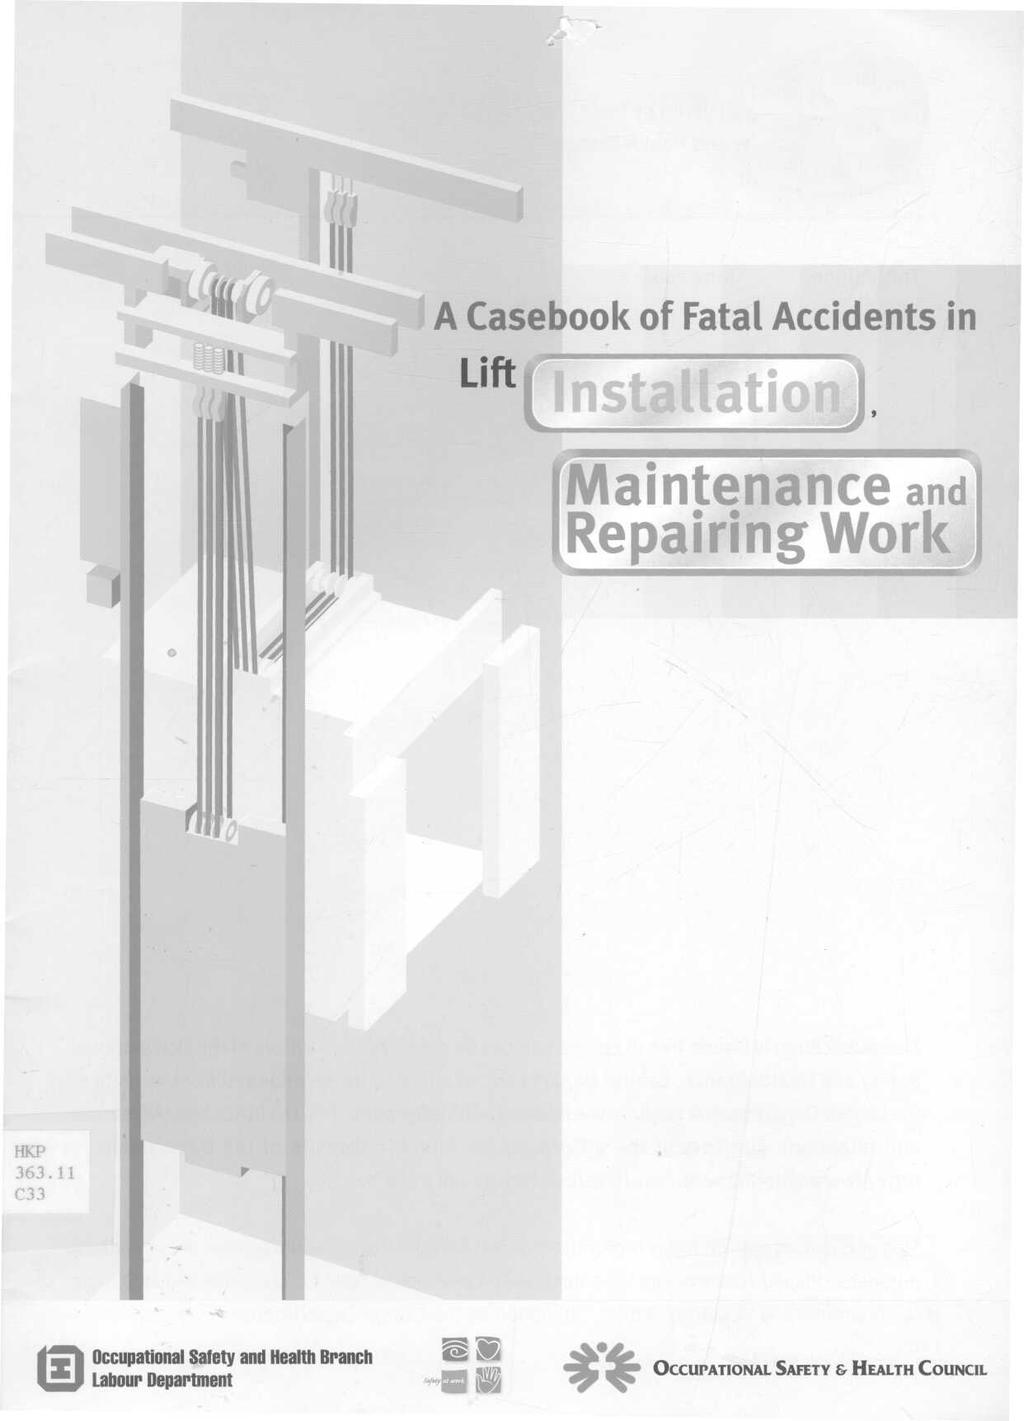 A Casebook of Fatal Accidents in 11 r Lift nstc 1 Vlaint ance and Repa ngwork HKP 363.